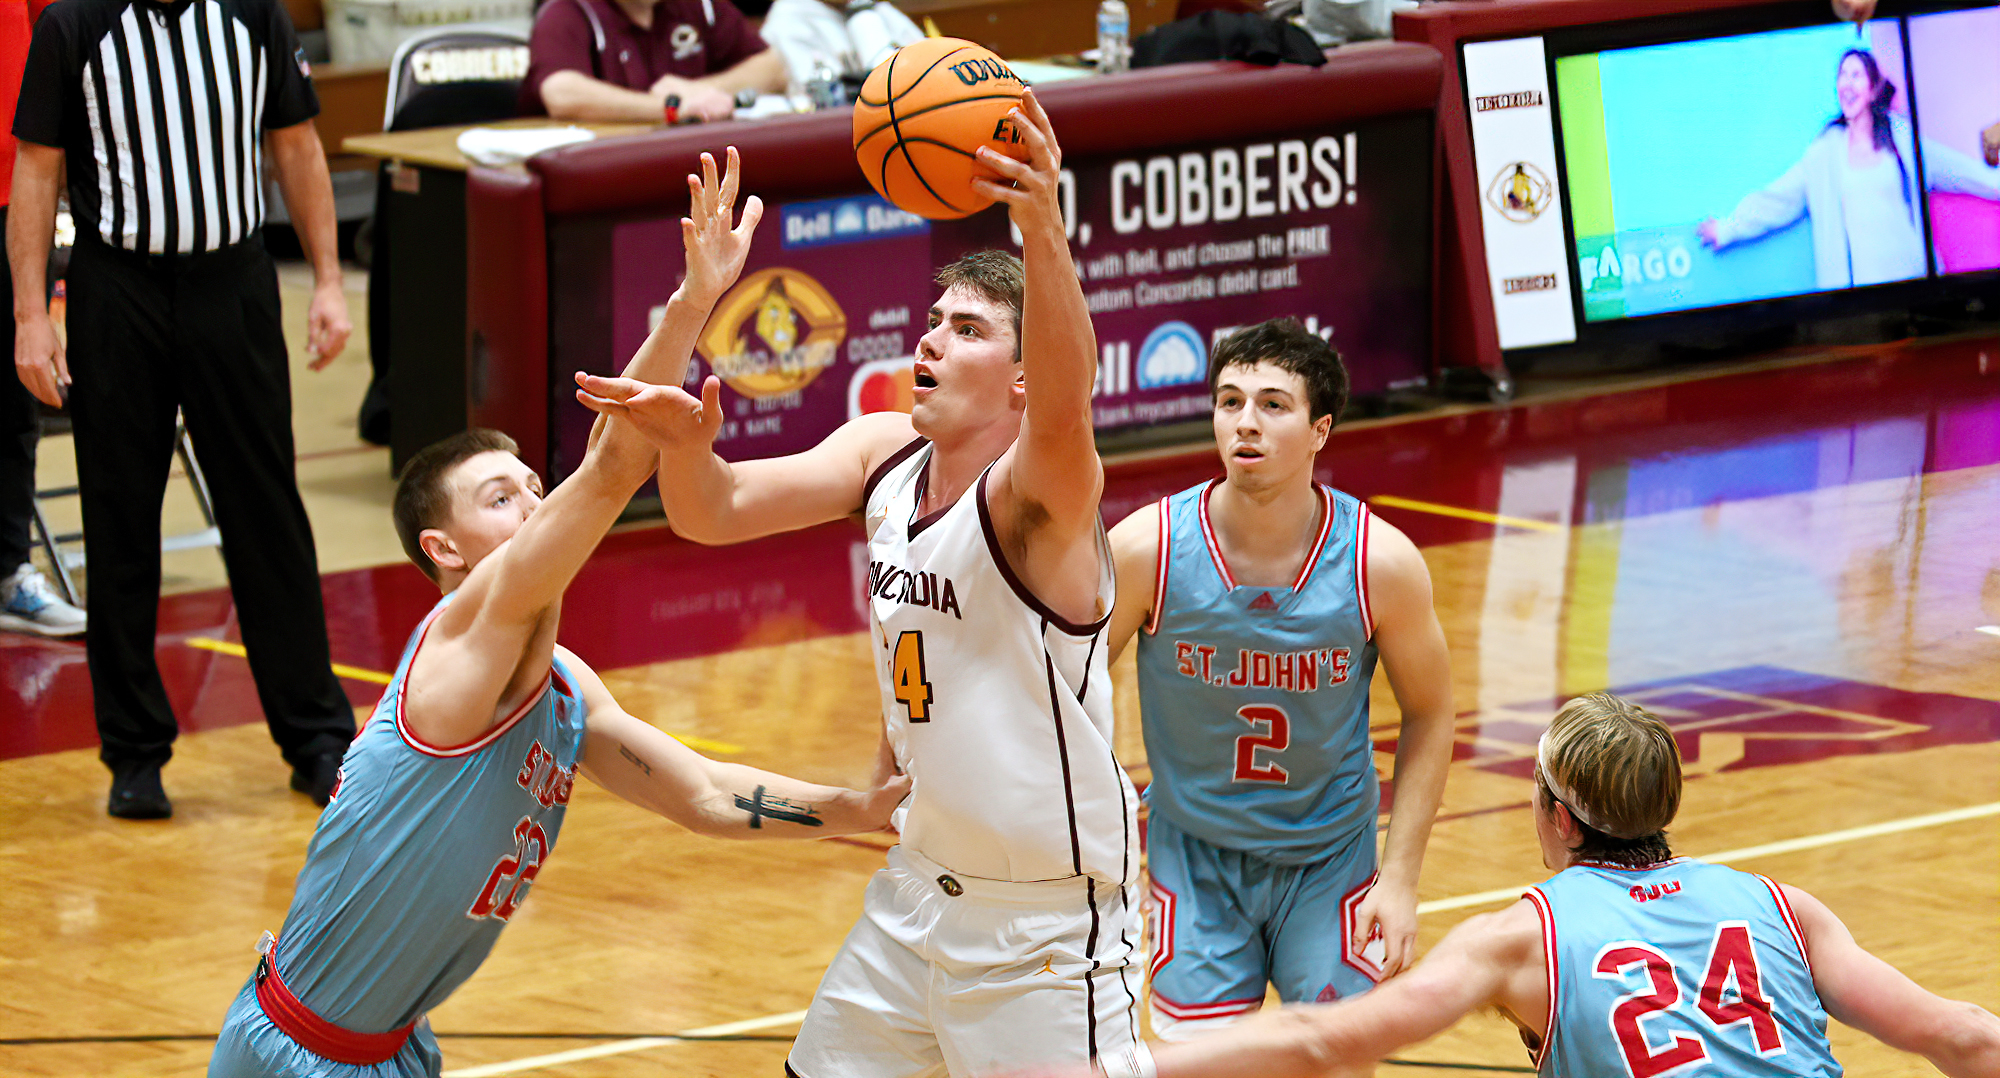 Jackson Loge goes up for two of his team-high 20 points in the Cobbers' game with St. John's. Loge also had three assists and two blocks.